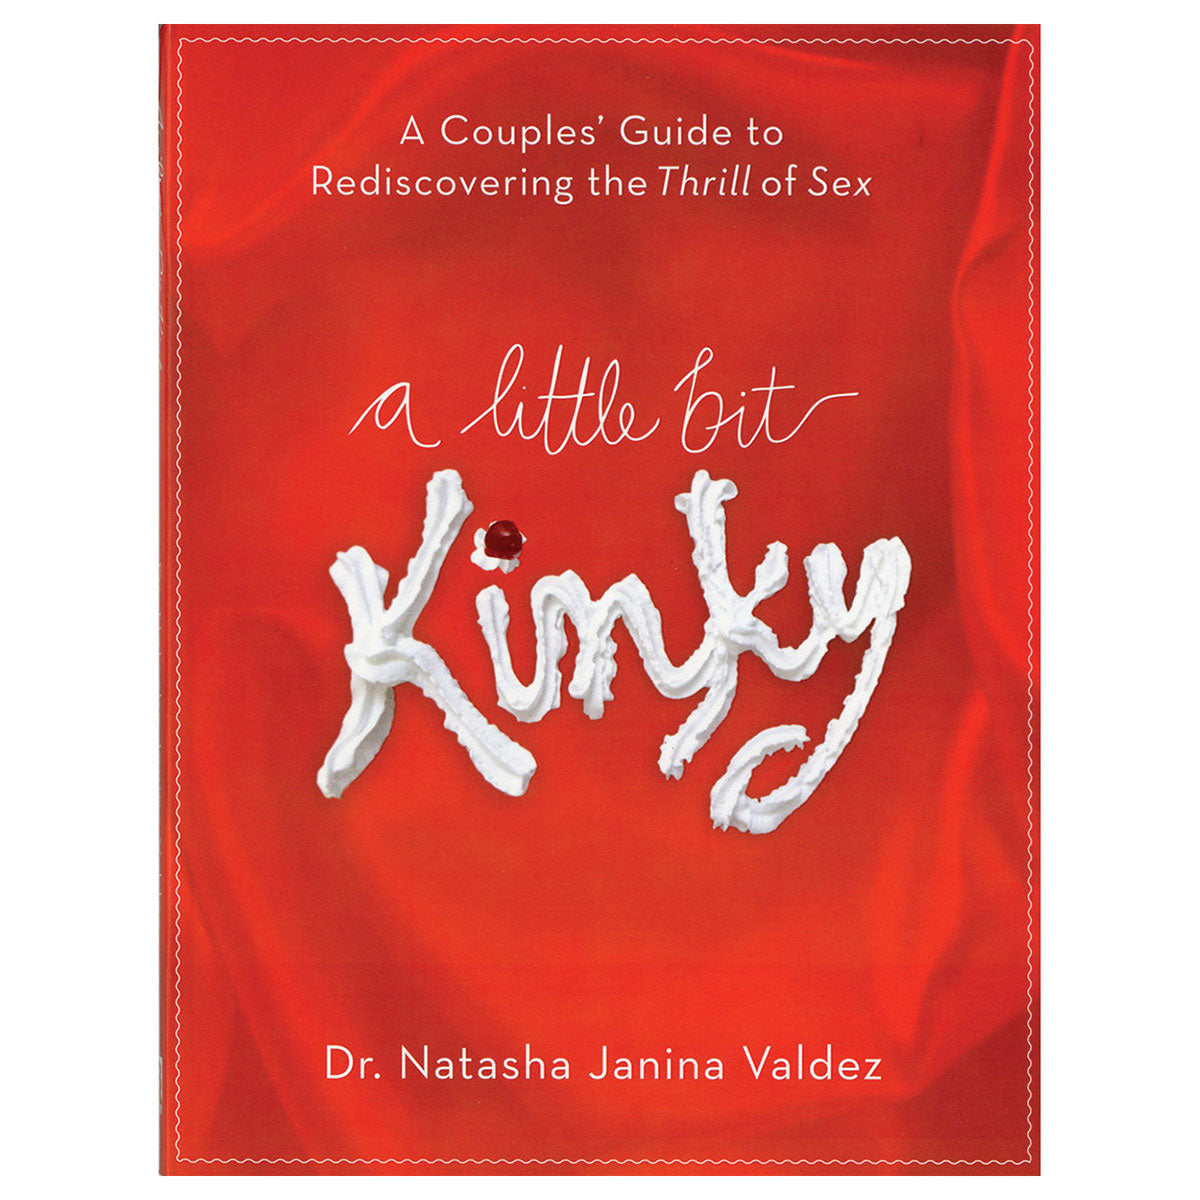 A Little Bit Kinky - A Couples' Guide to Rediscovering the Thrill of Sex - Harmony Books